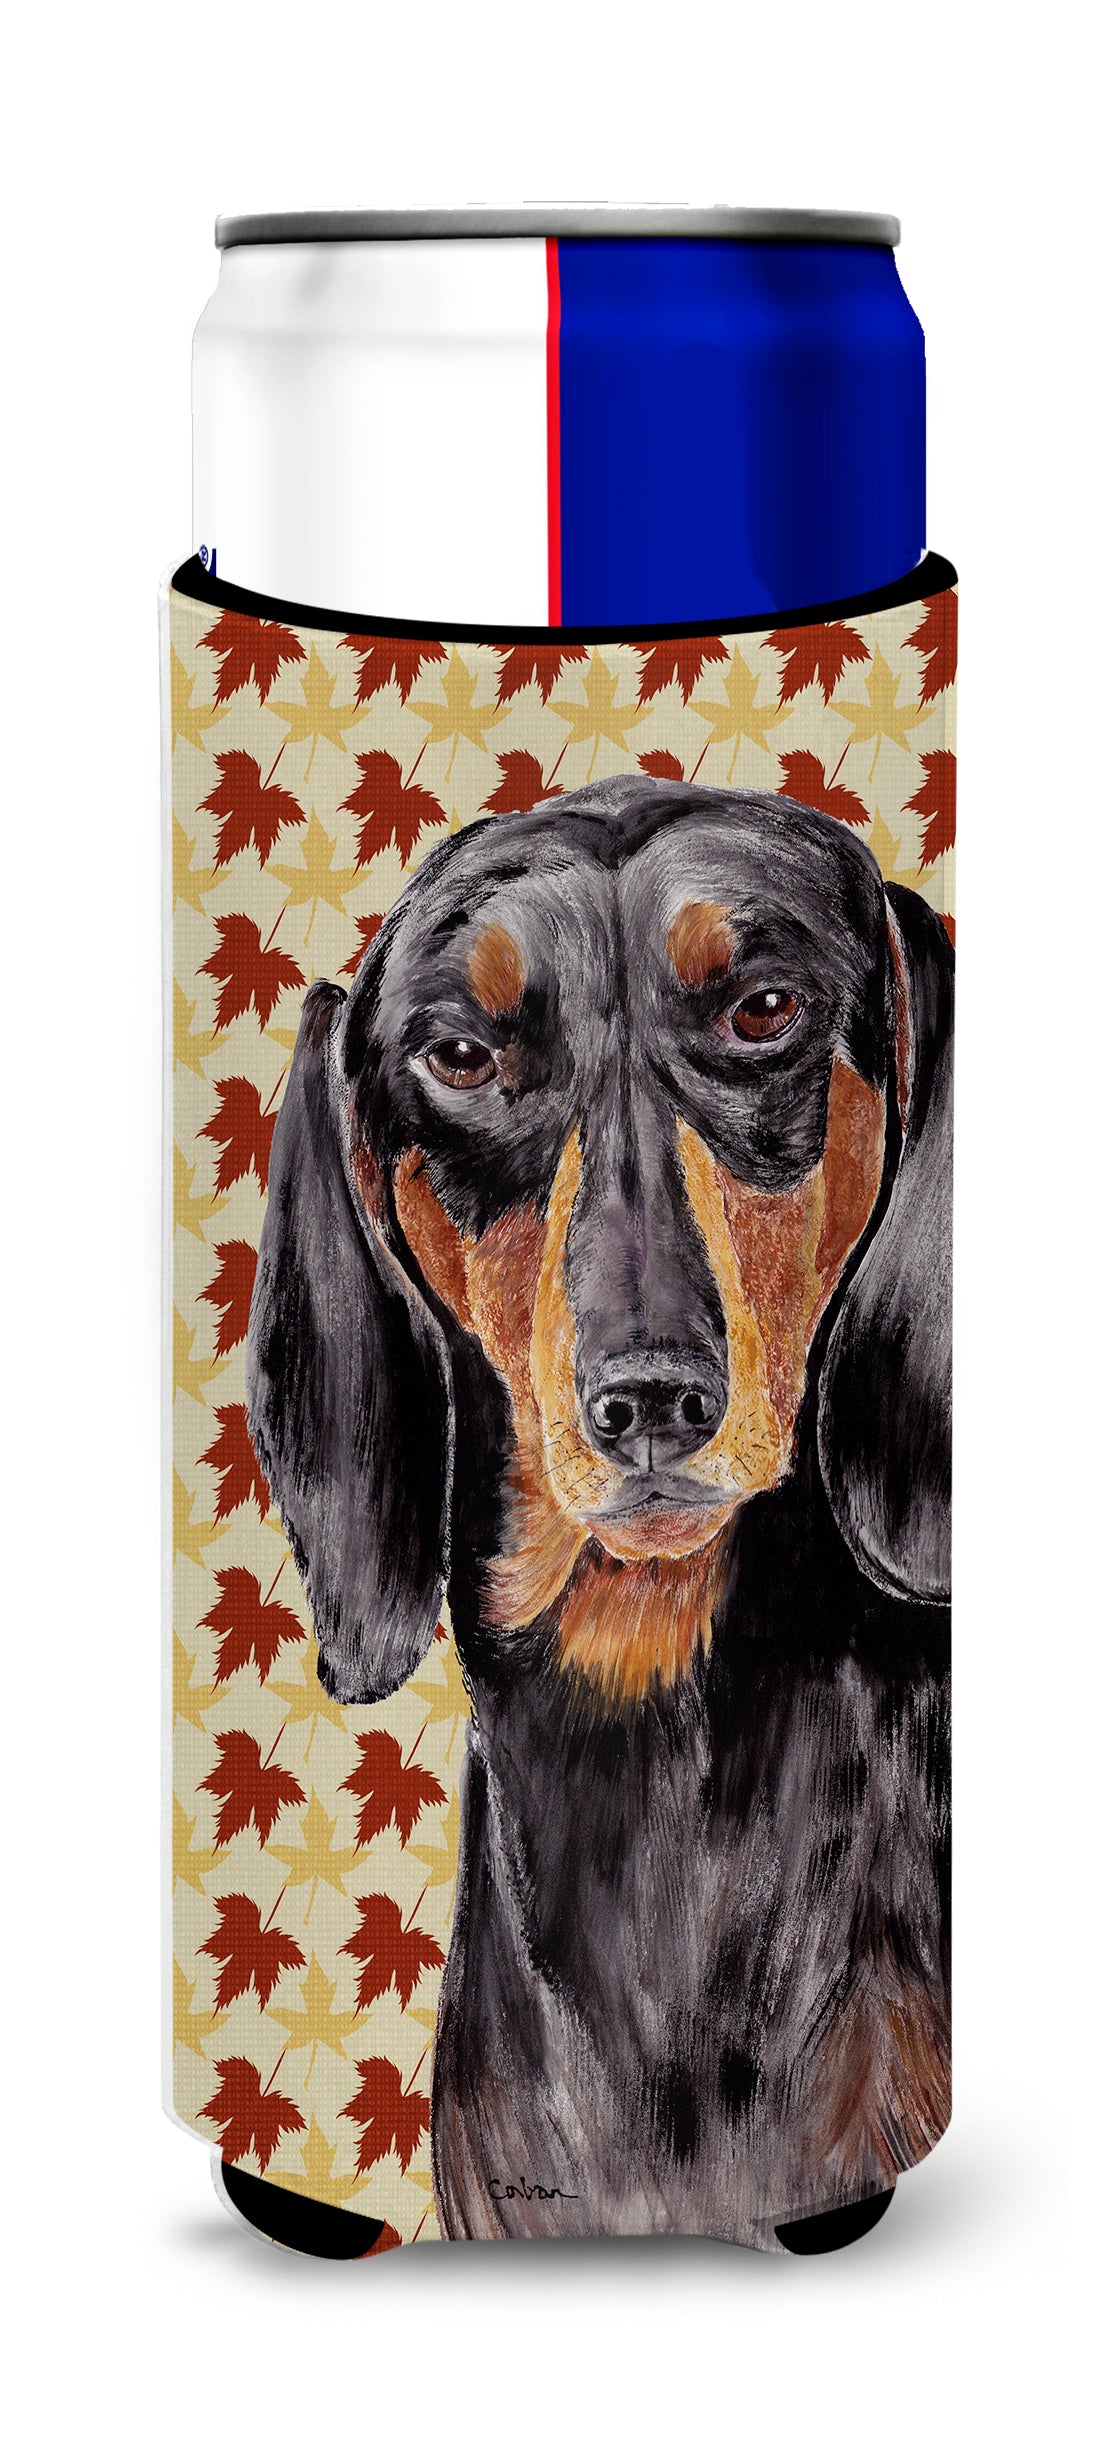 Dachshund Fall Leaves Portrait Ultra Beverage Insulators for slim cans SC9203MUK.